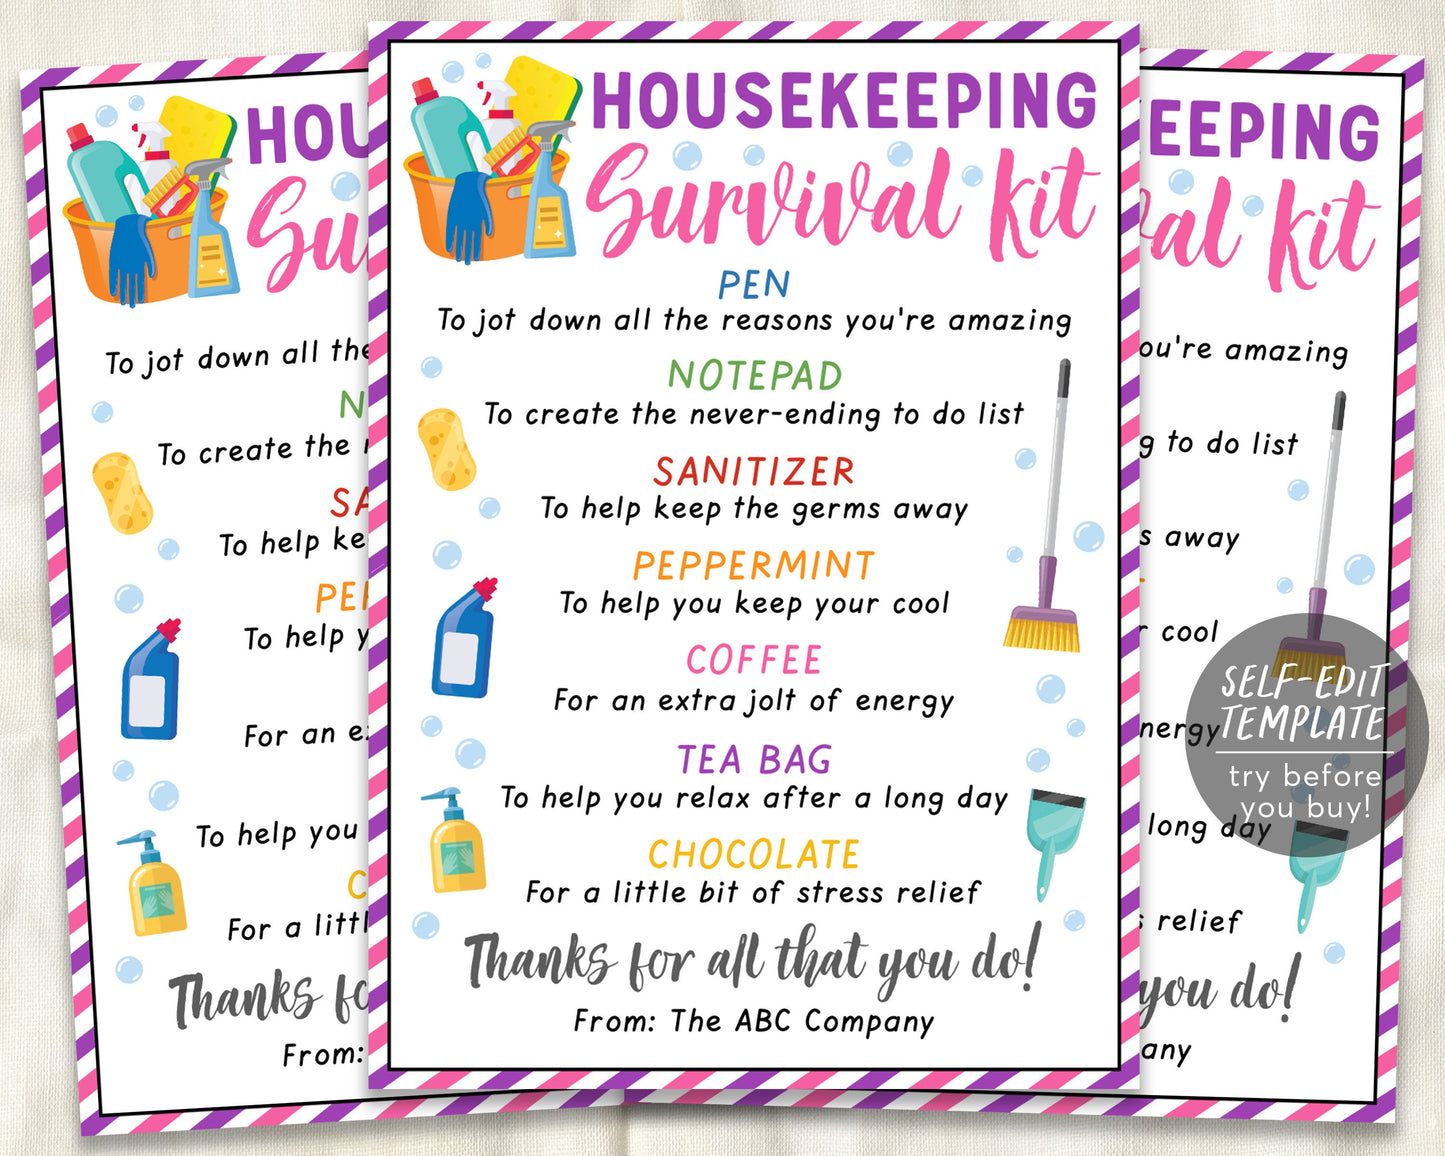 Housekeeper Survival Kit Gift Tags Editable Template, Housekeeping Appreciation Week Gift, Home Cleaning Company Staff Janitor Housekeeper's